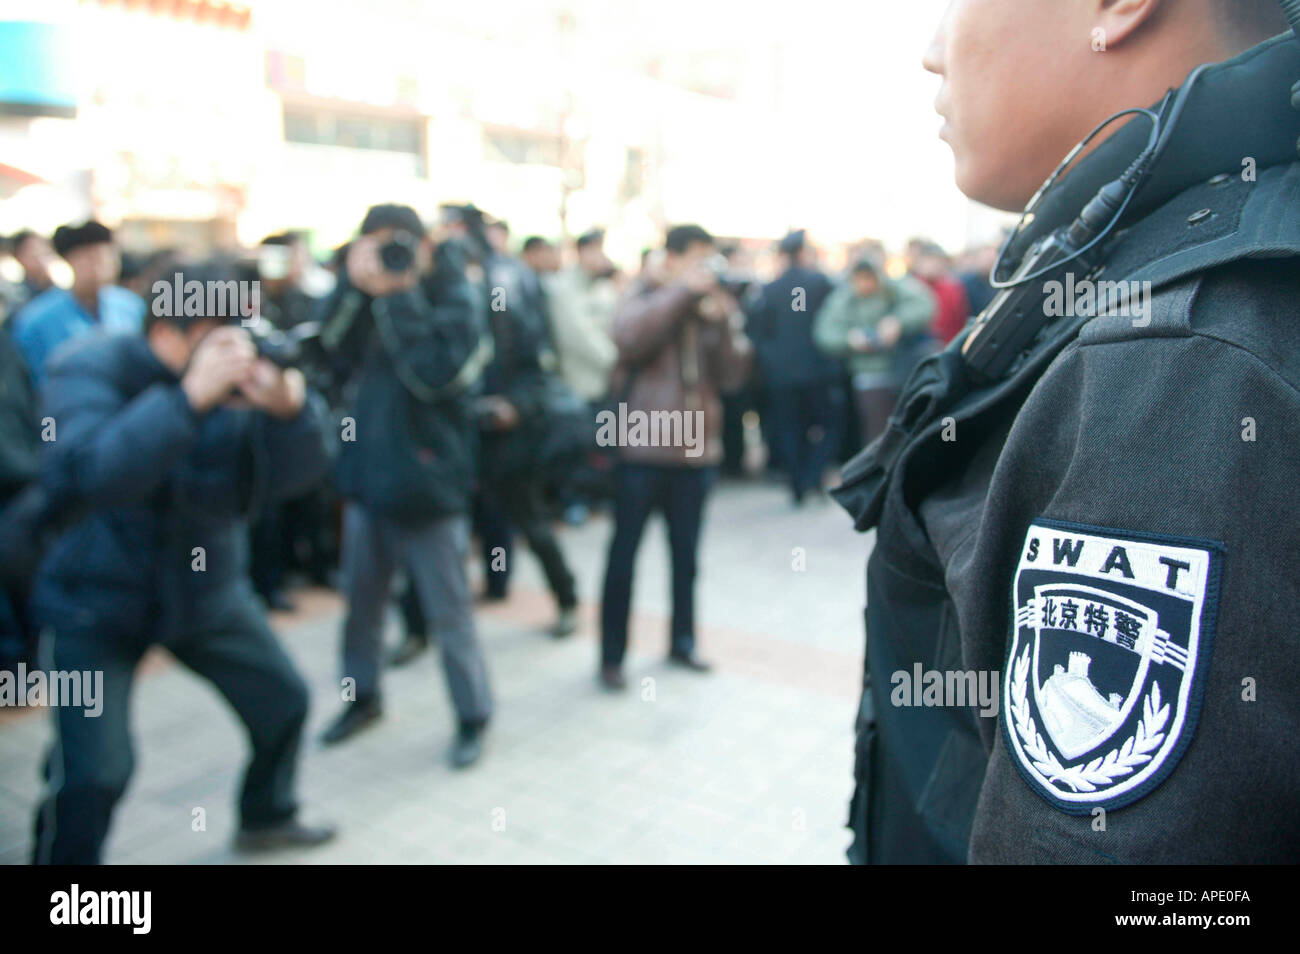 Chinese SWAT team and their weapons during a public demonstration Stock Photo